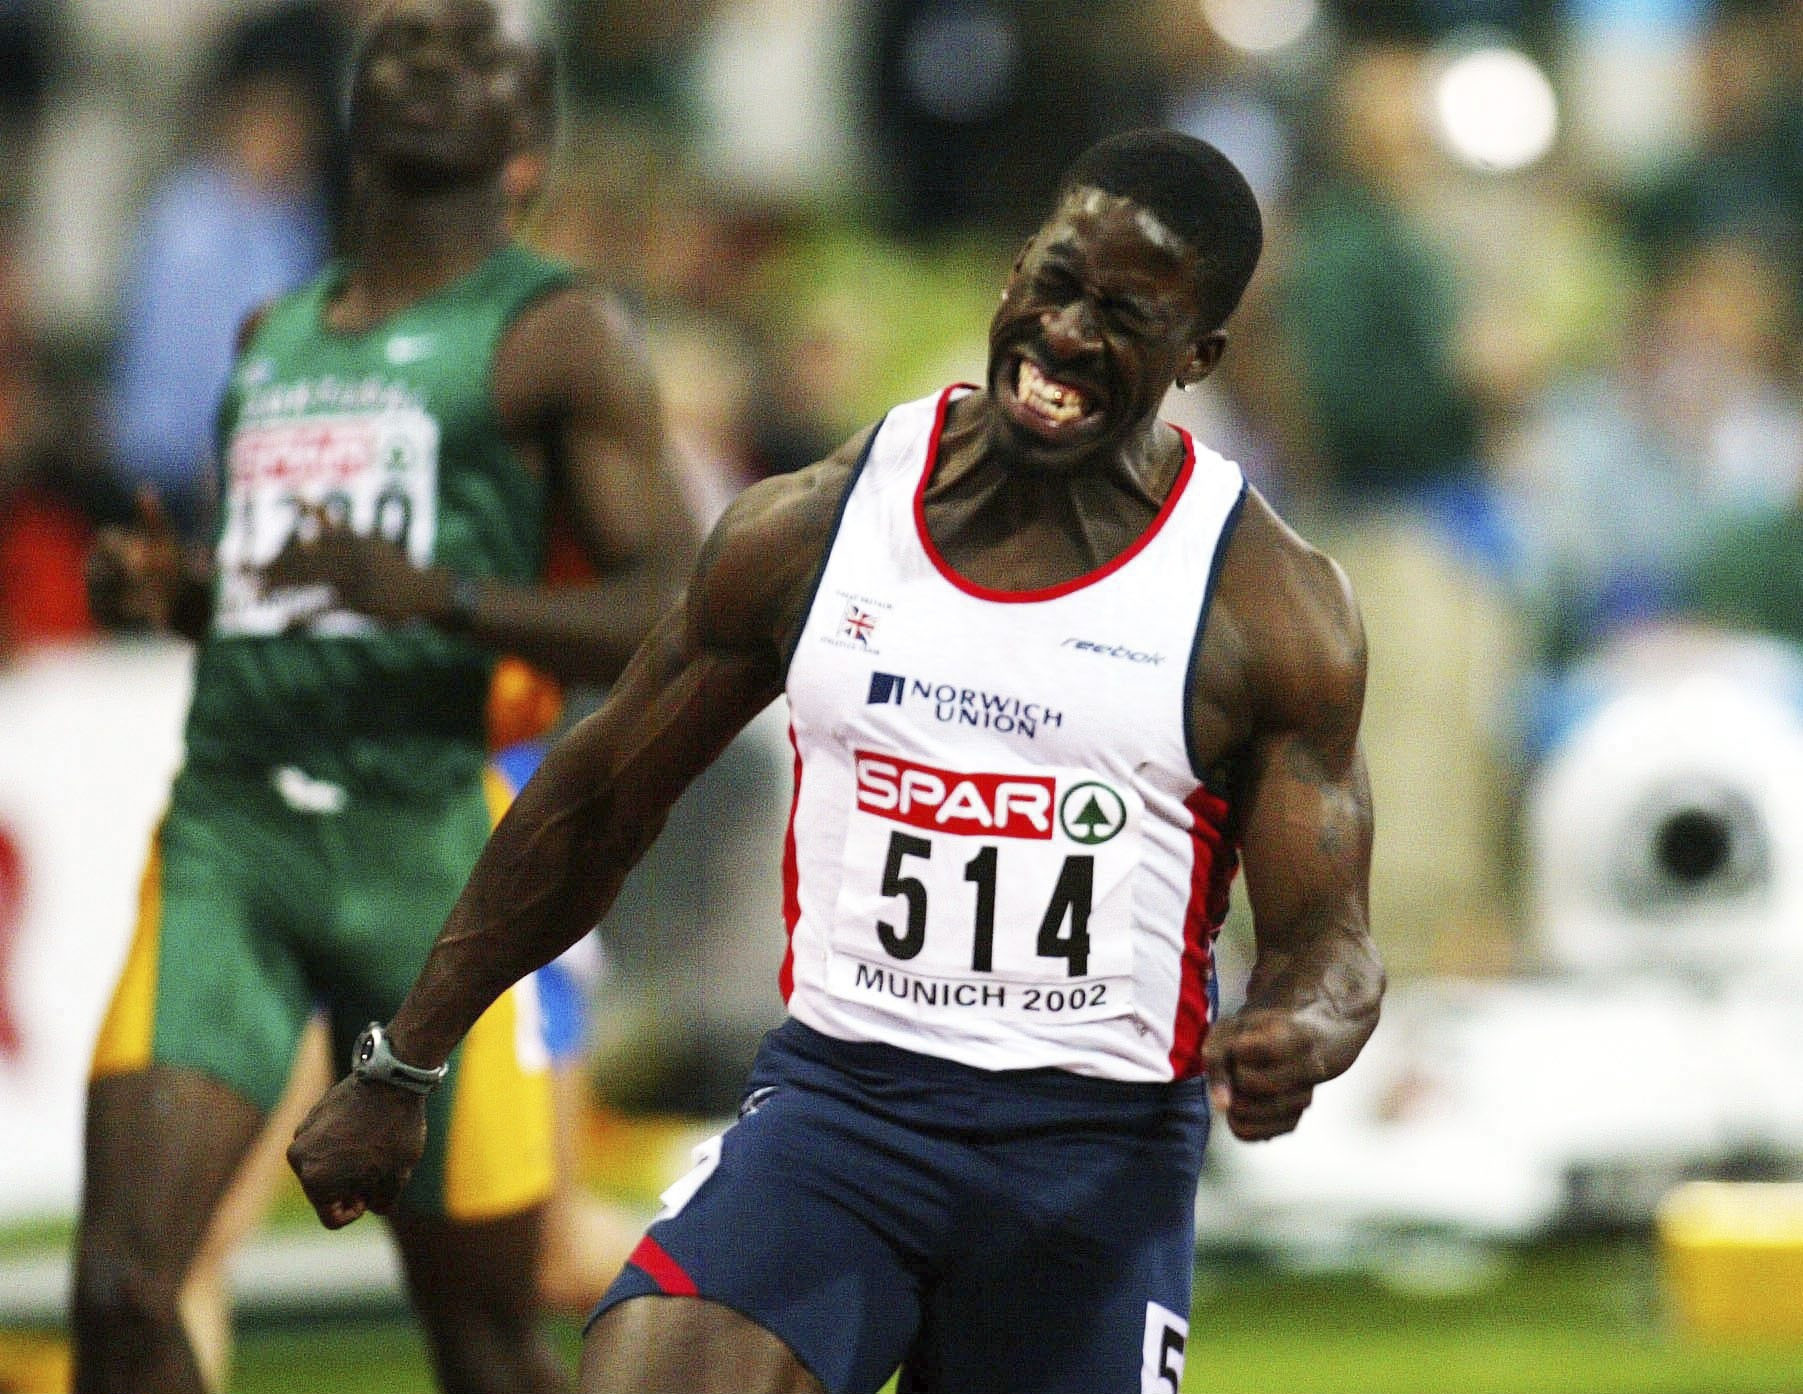 Dwain Chambers won the 100 metres at the 2002 European Championships in Munich but the following year failed a drugs test and was stripped of his title and banned for two years ©Getty Images
